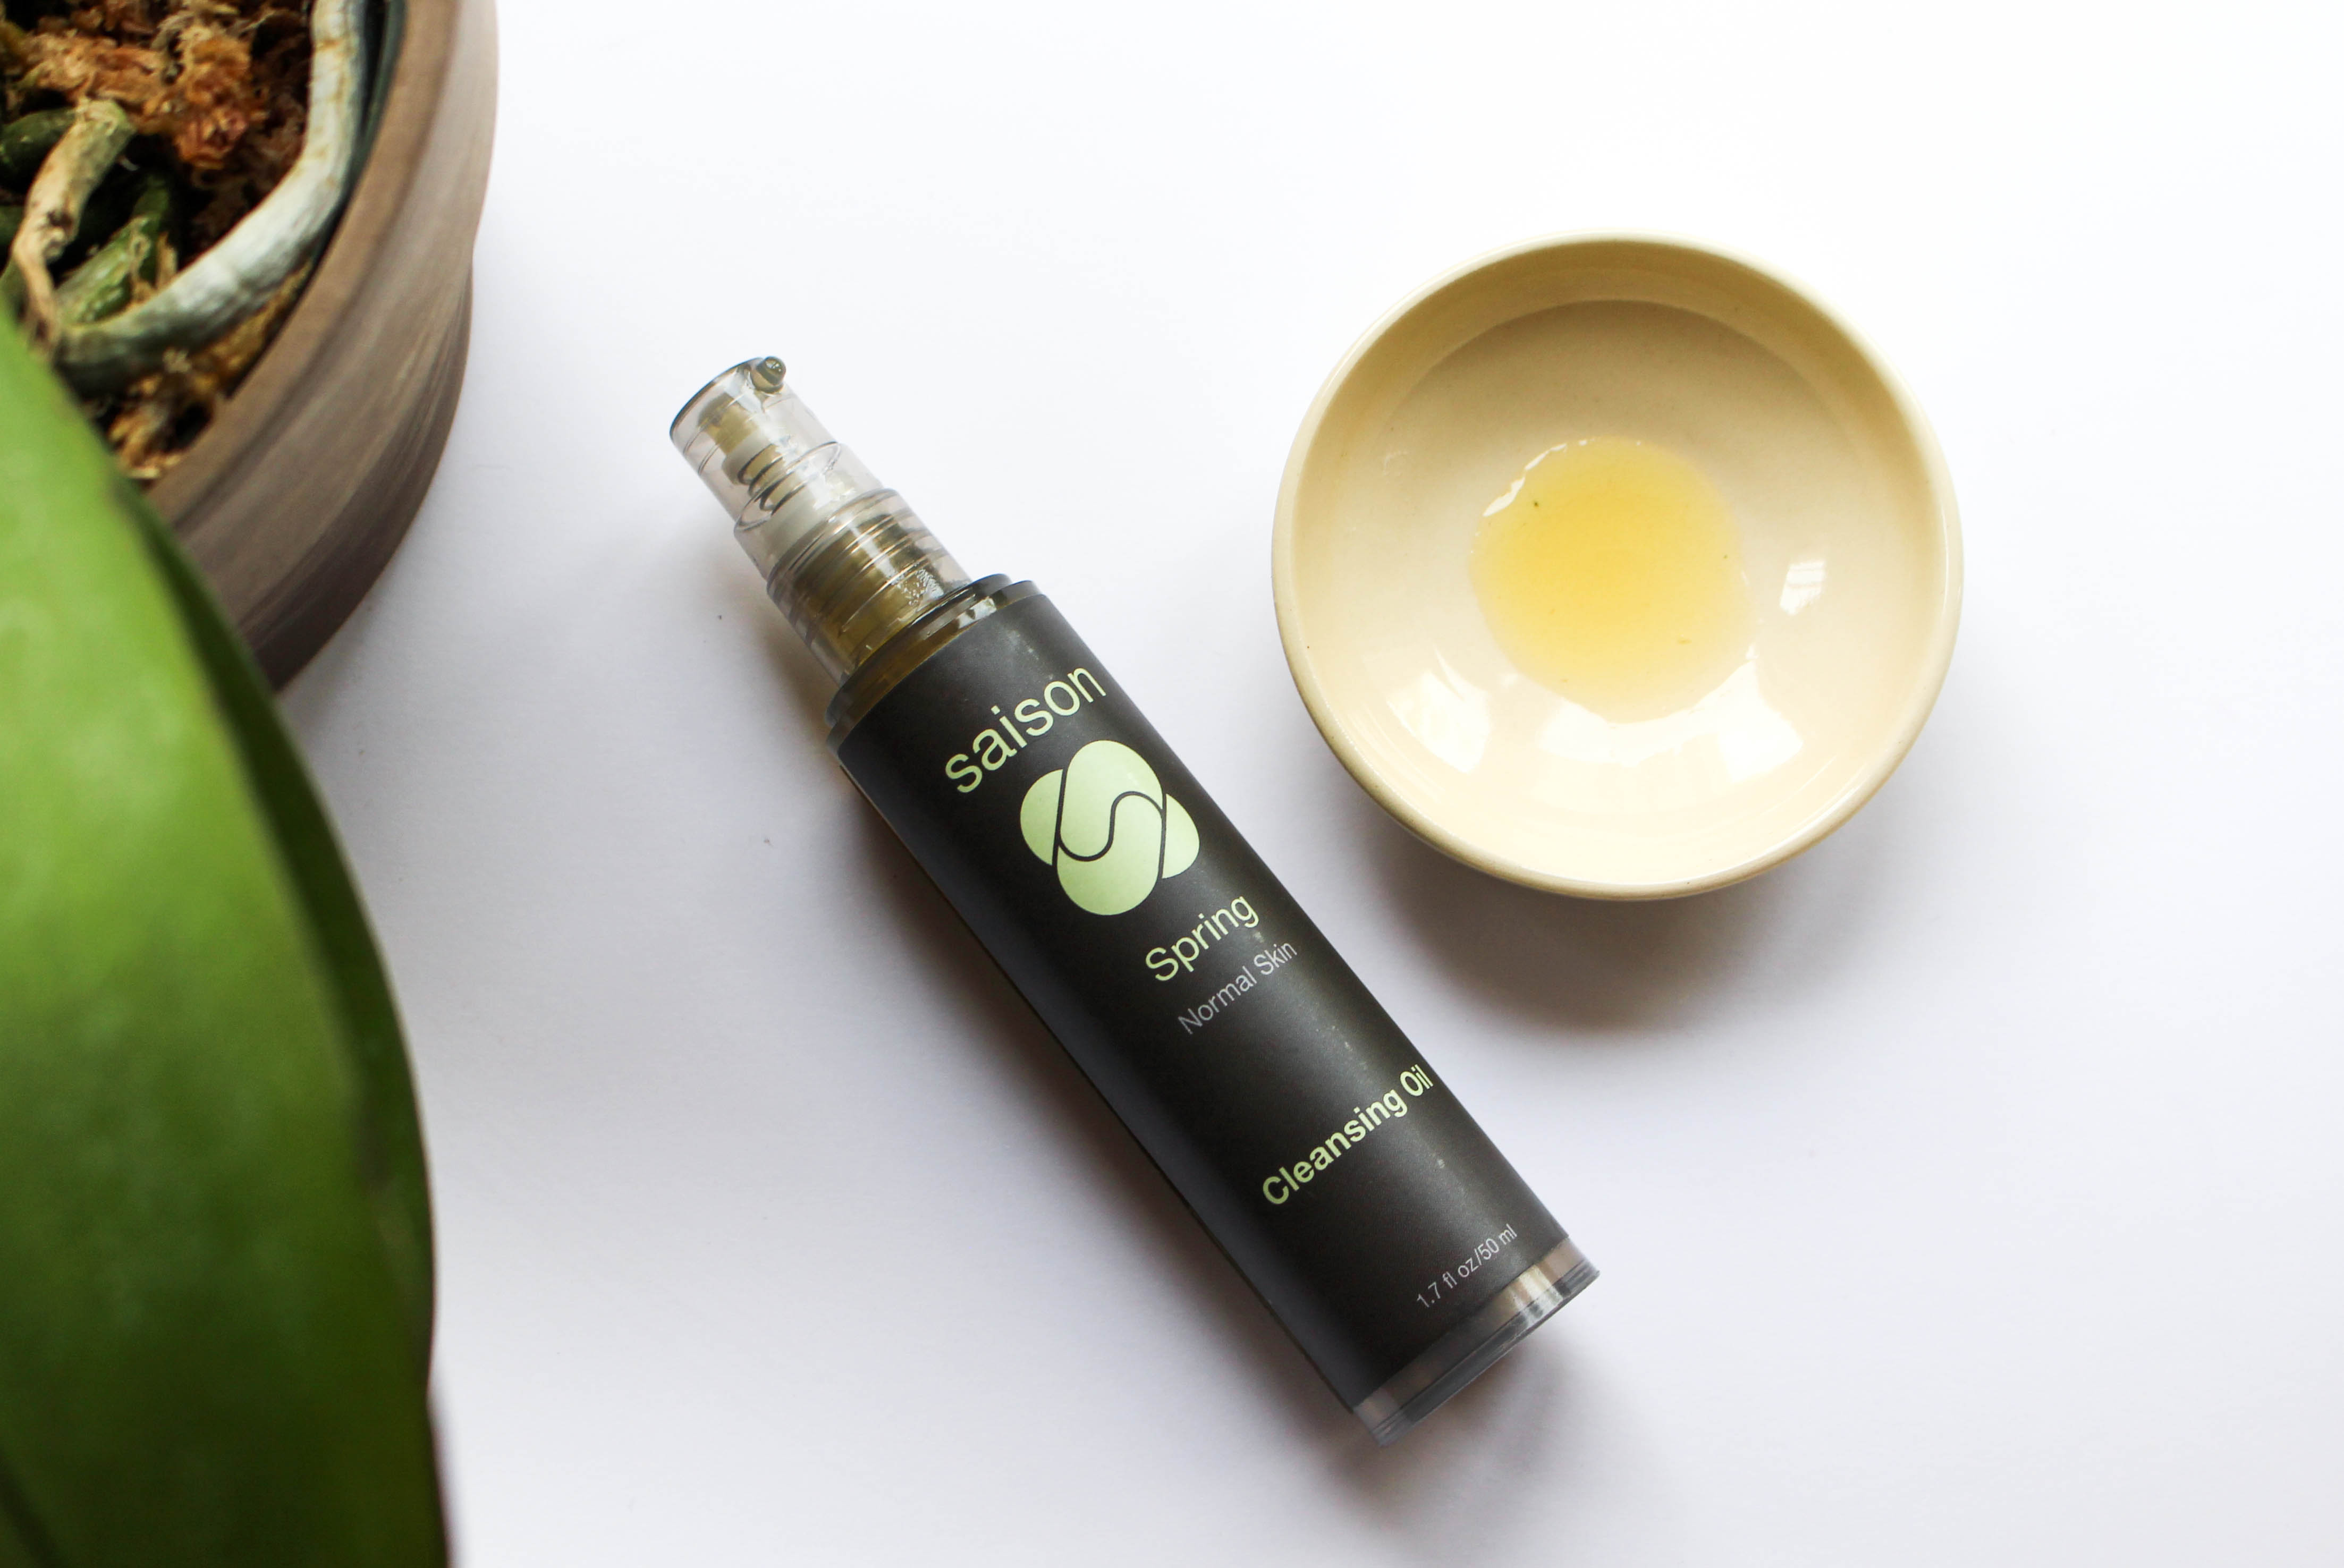 Saison Beauty Spring Cleansing Oil